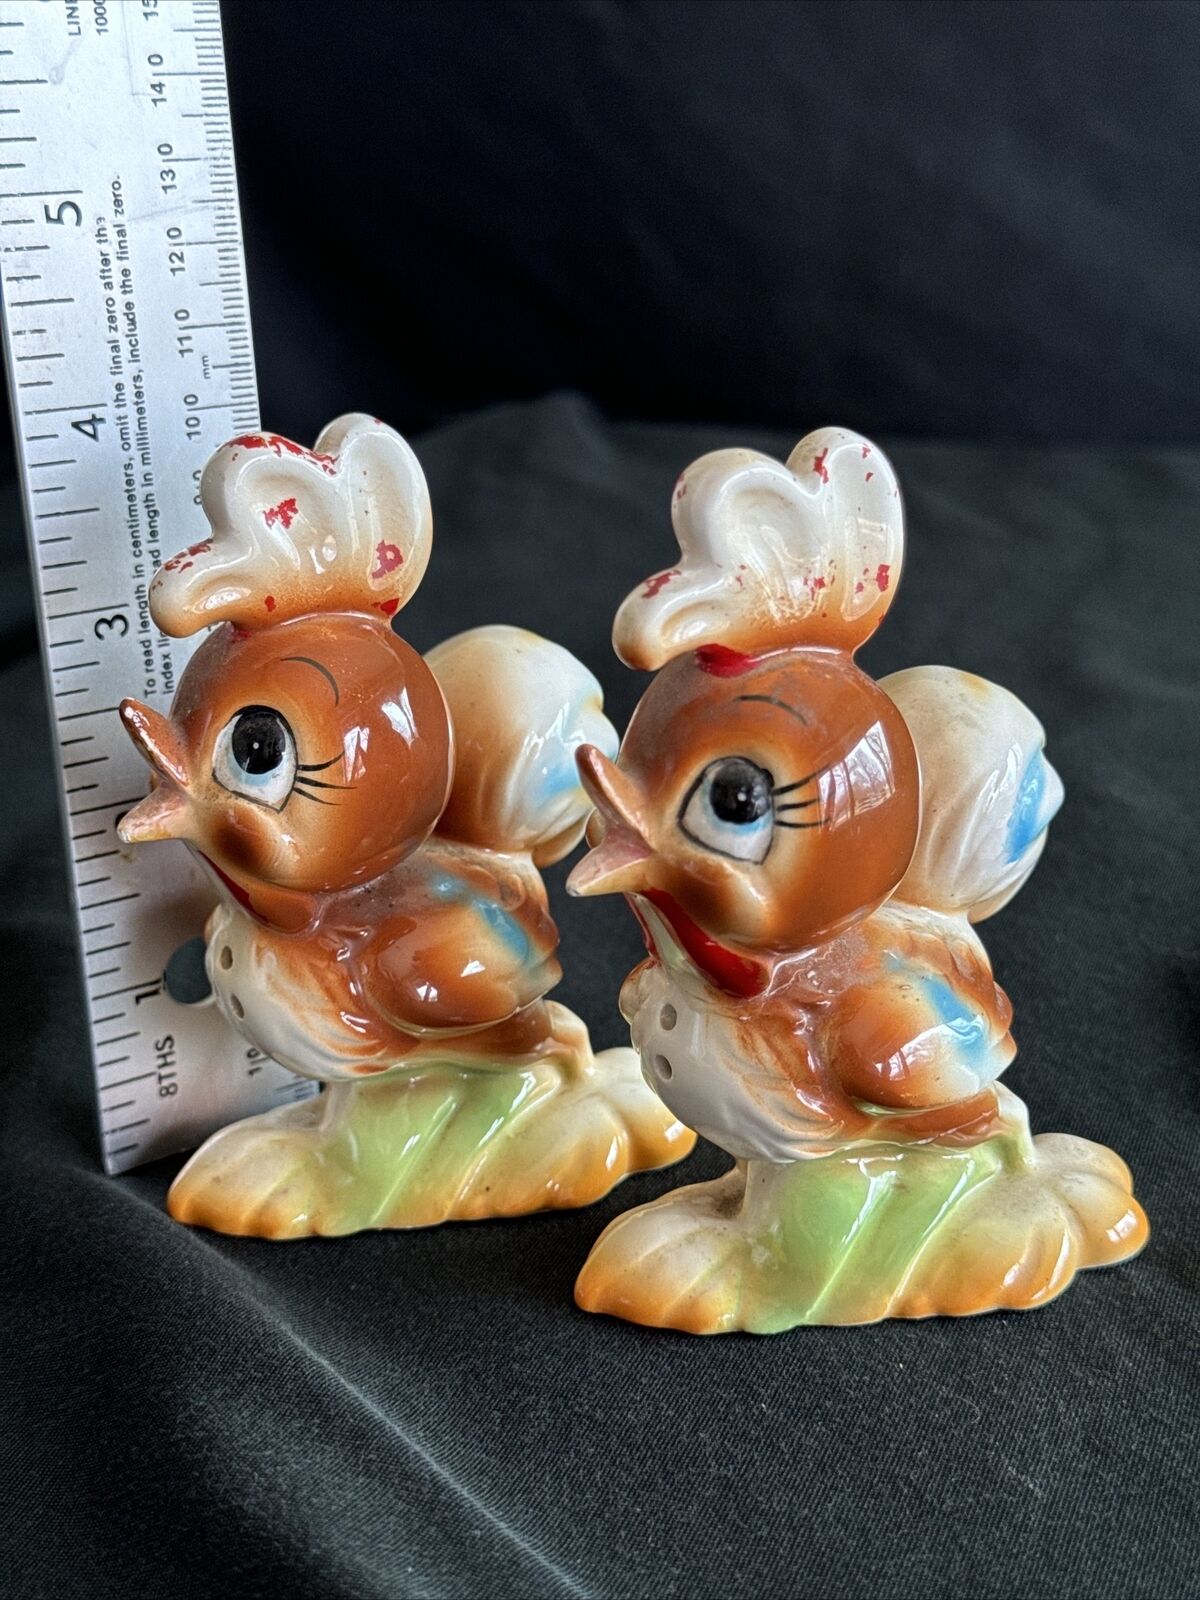 Vintage Norcrest Anthromorphic Rooster salt and pepper shakers